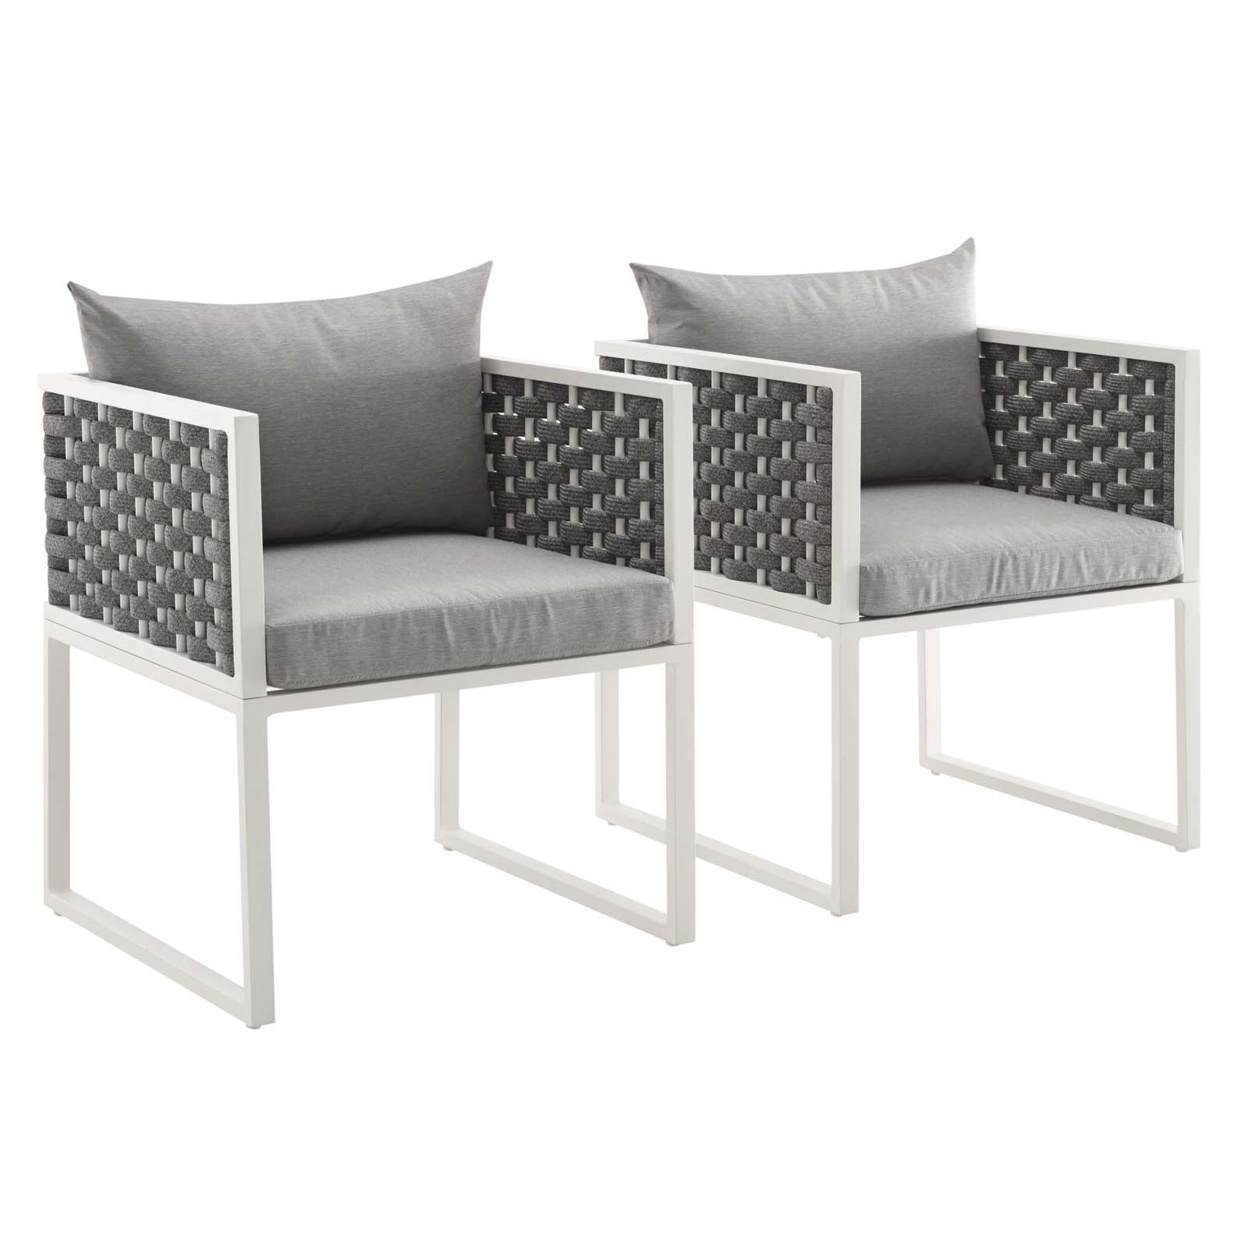 Stance Dining Armchair Outdoor Patio Aluminum Set Of 2, White Gray